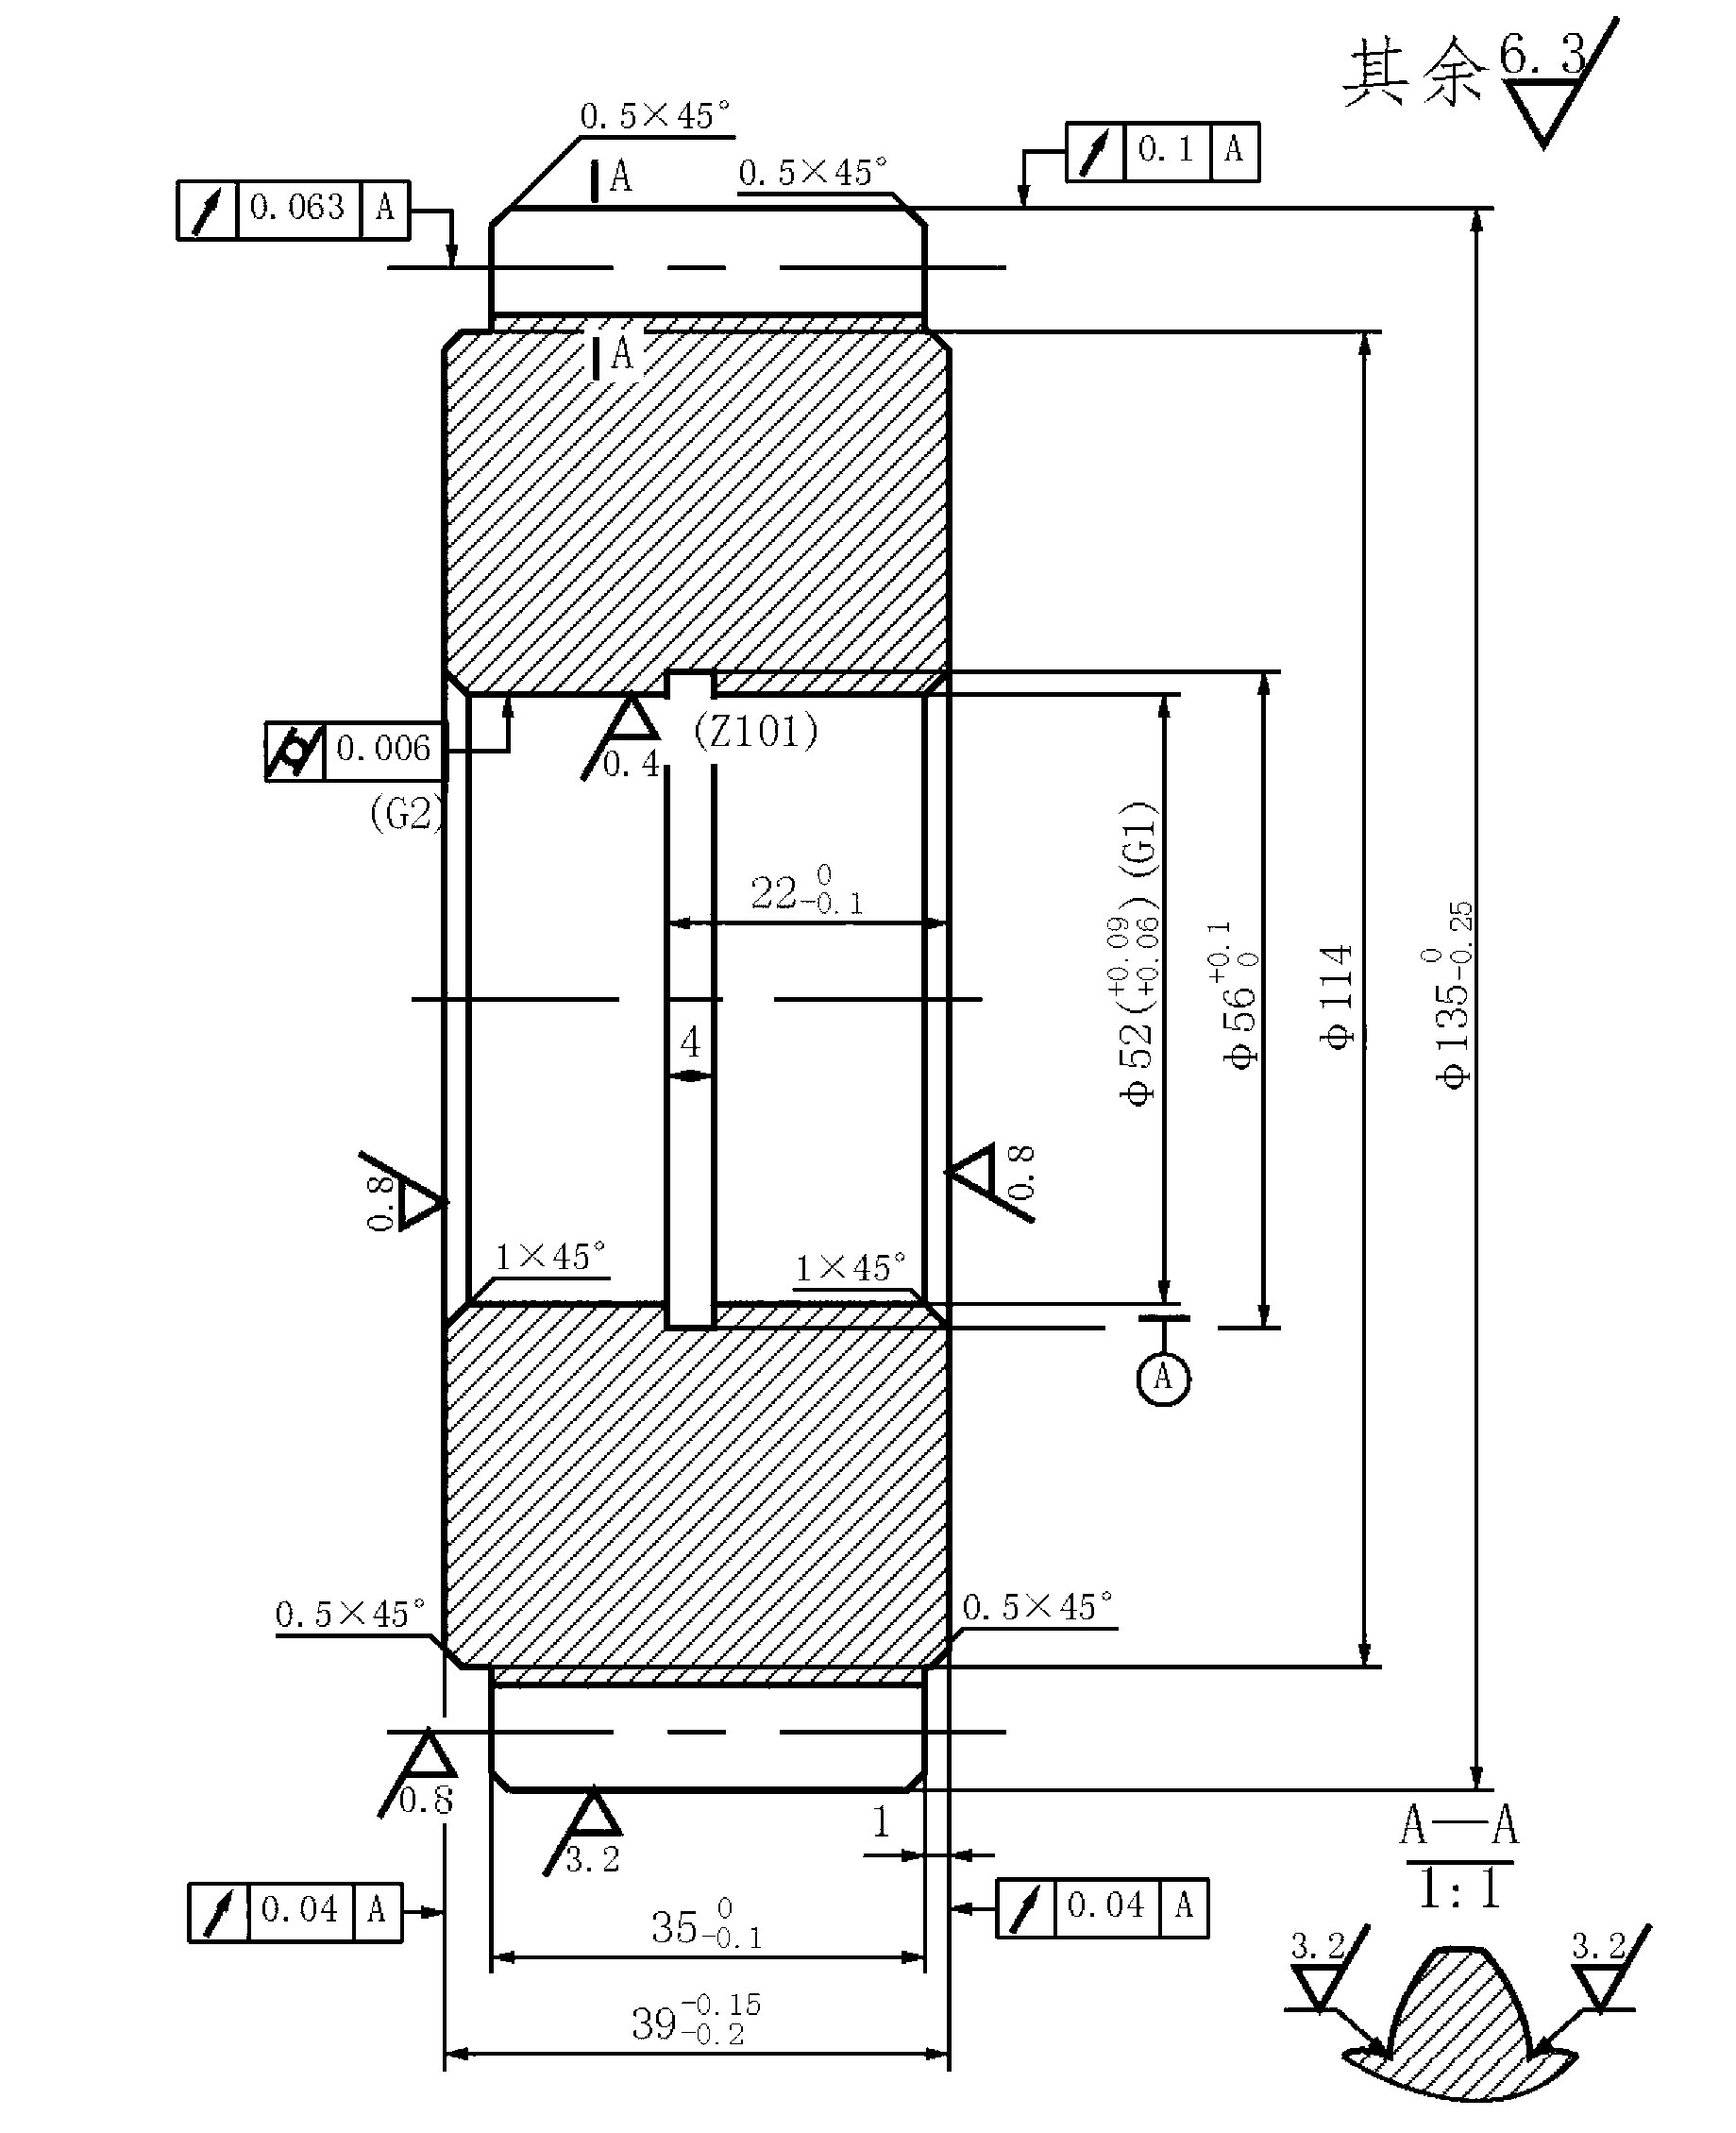 Computer-aided process planning method with graphic function